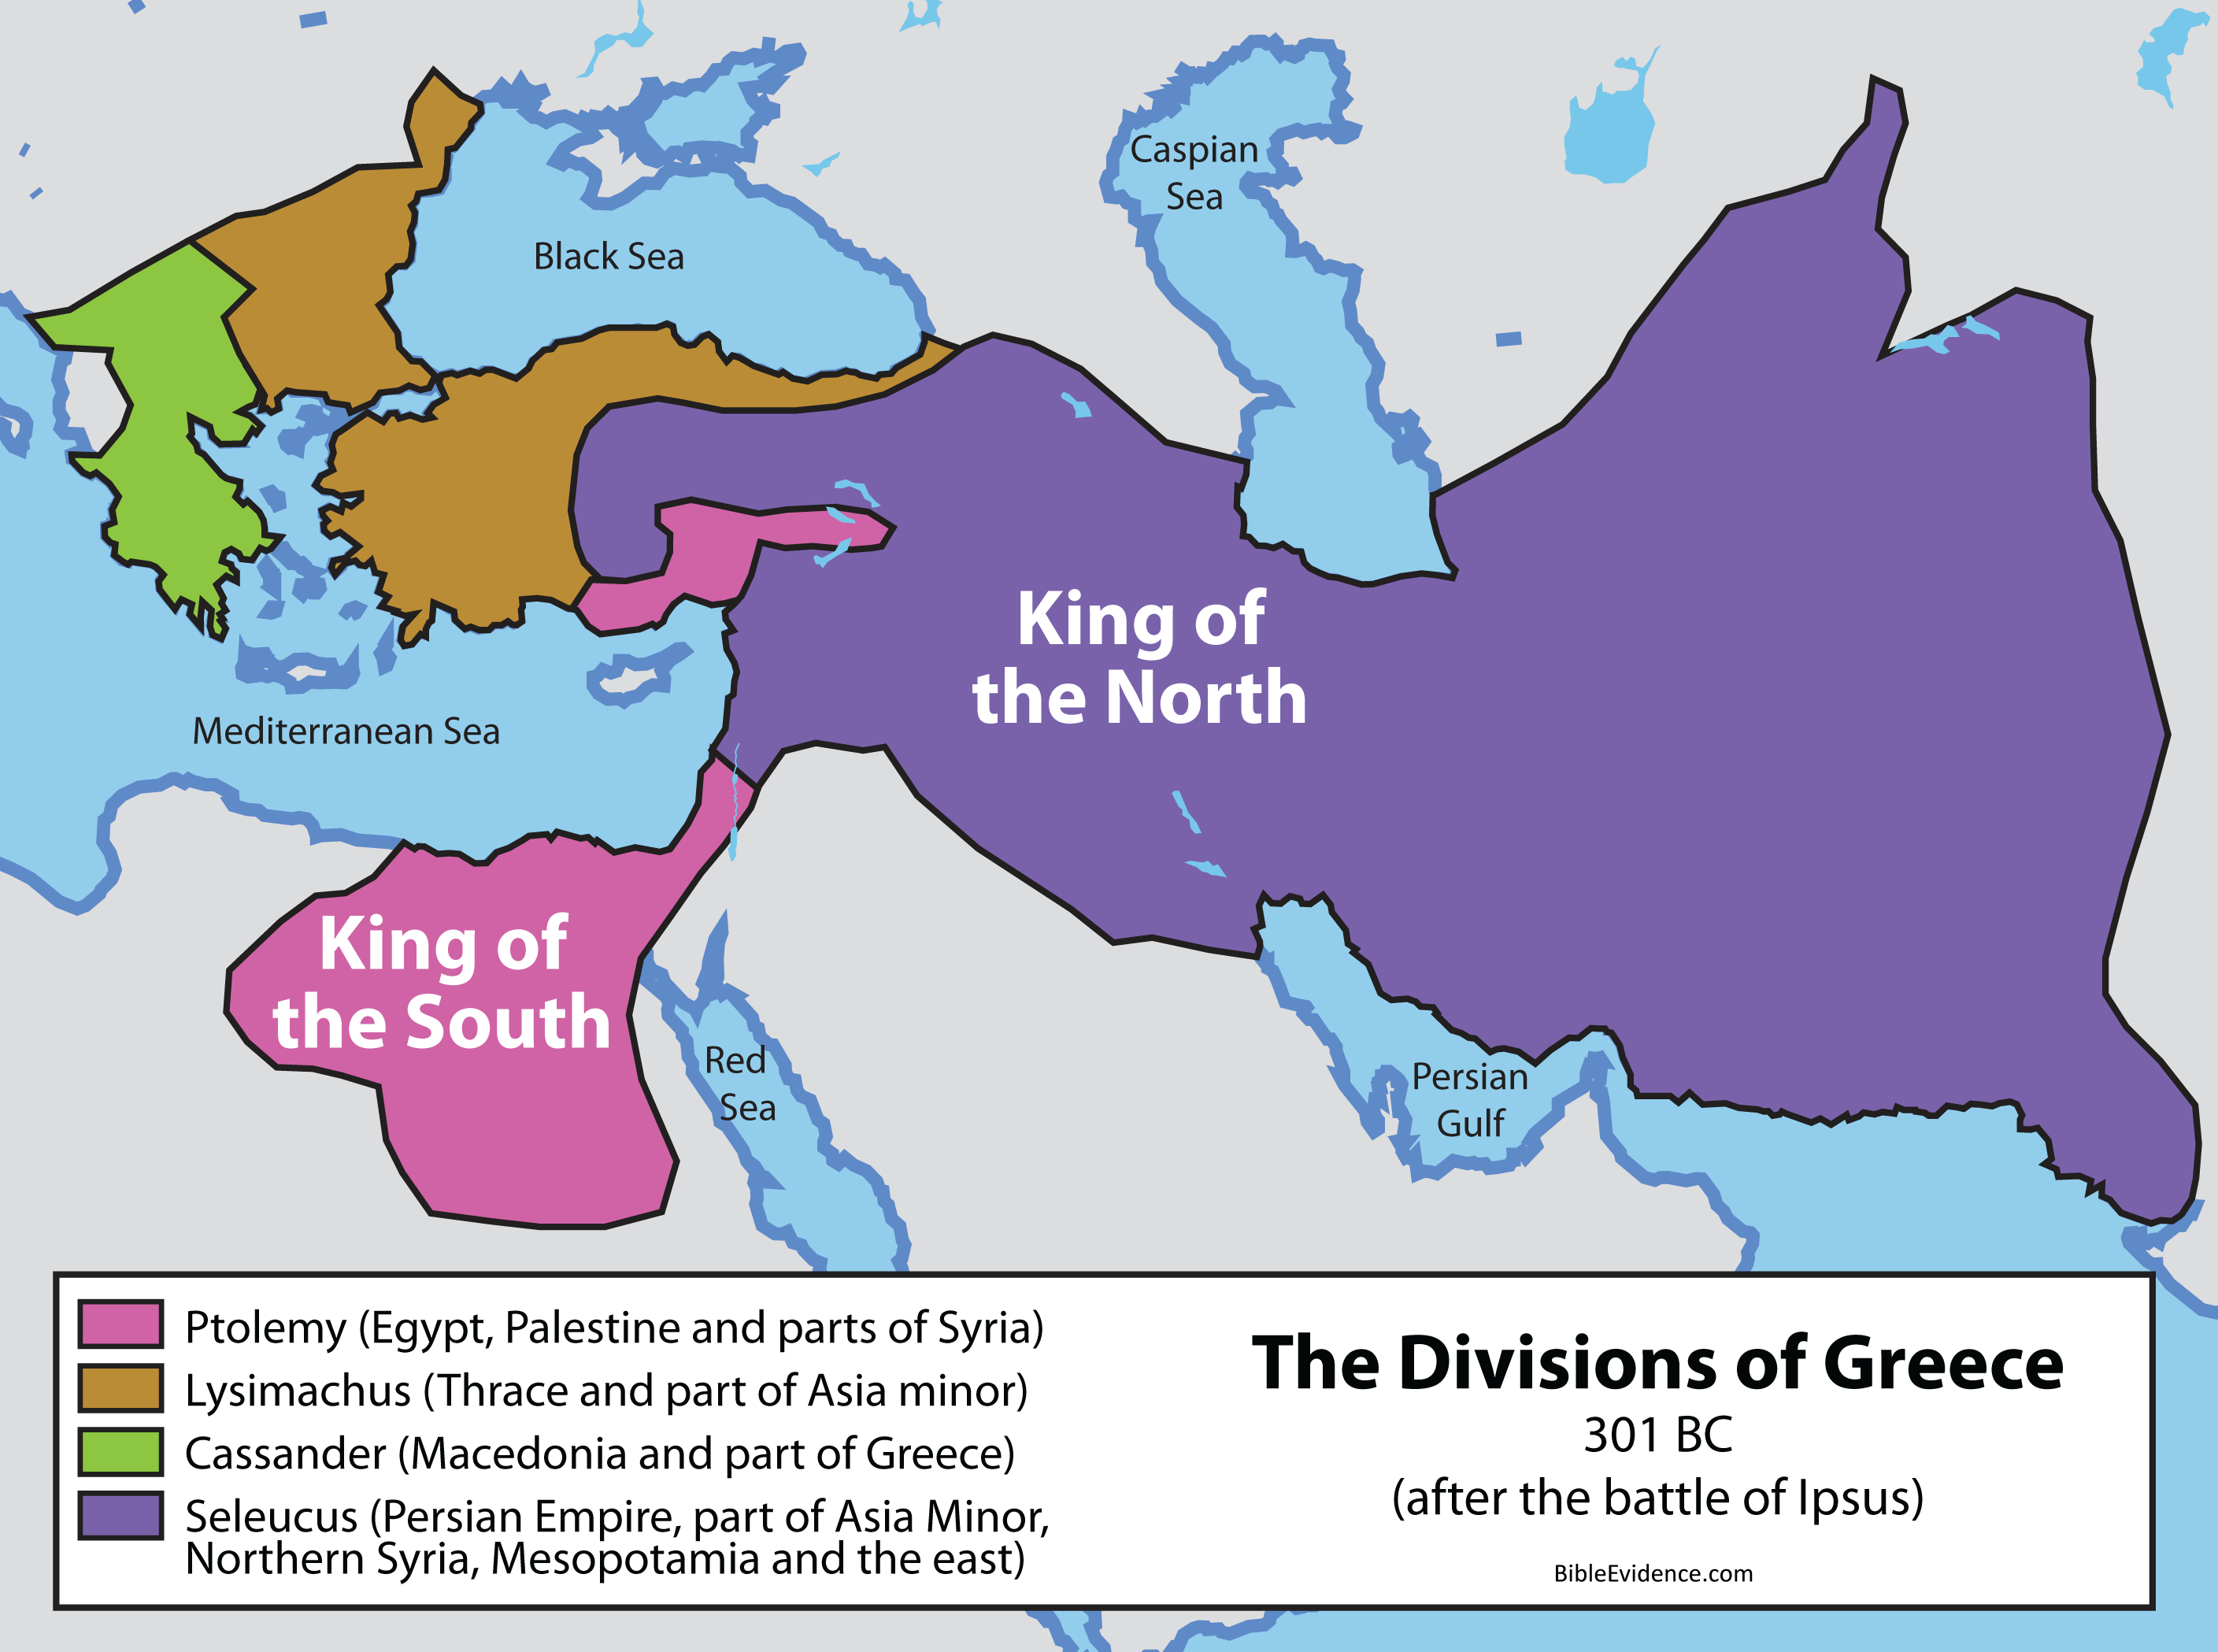 4 divisions of Greece